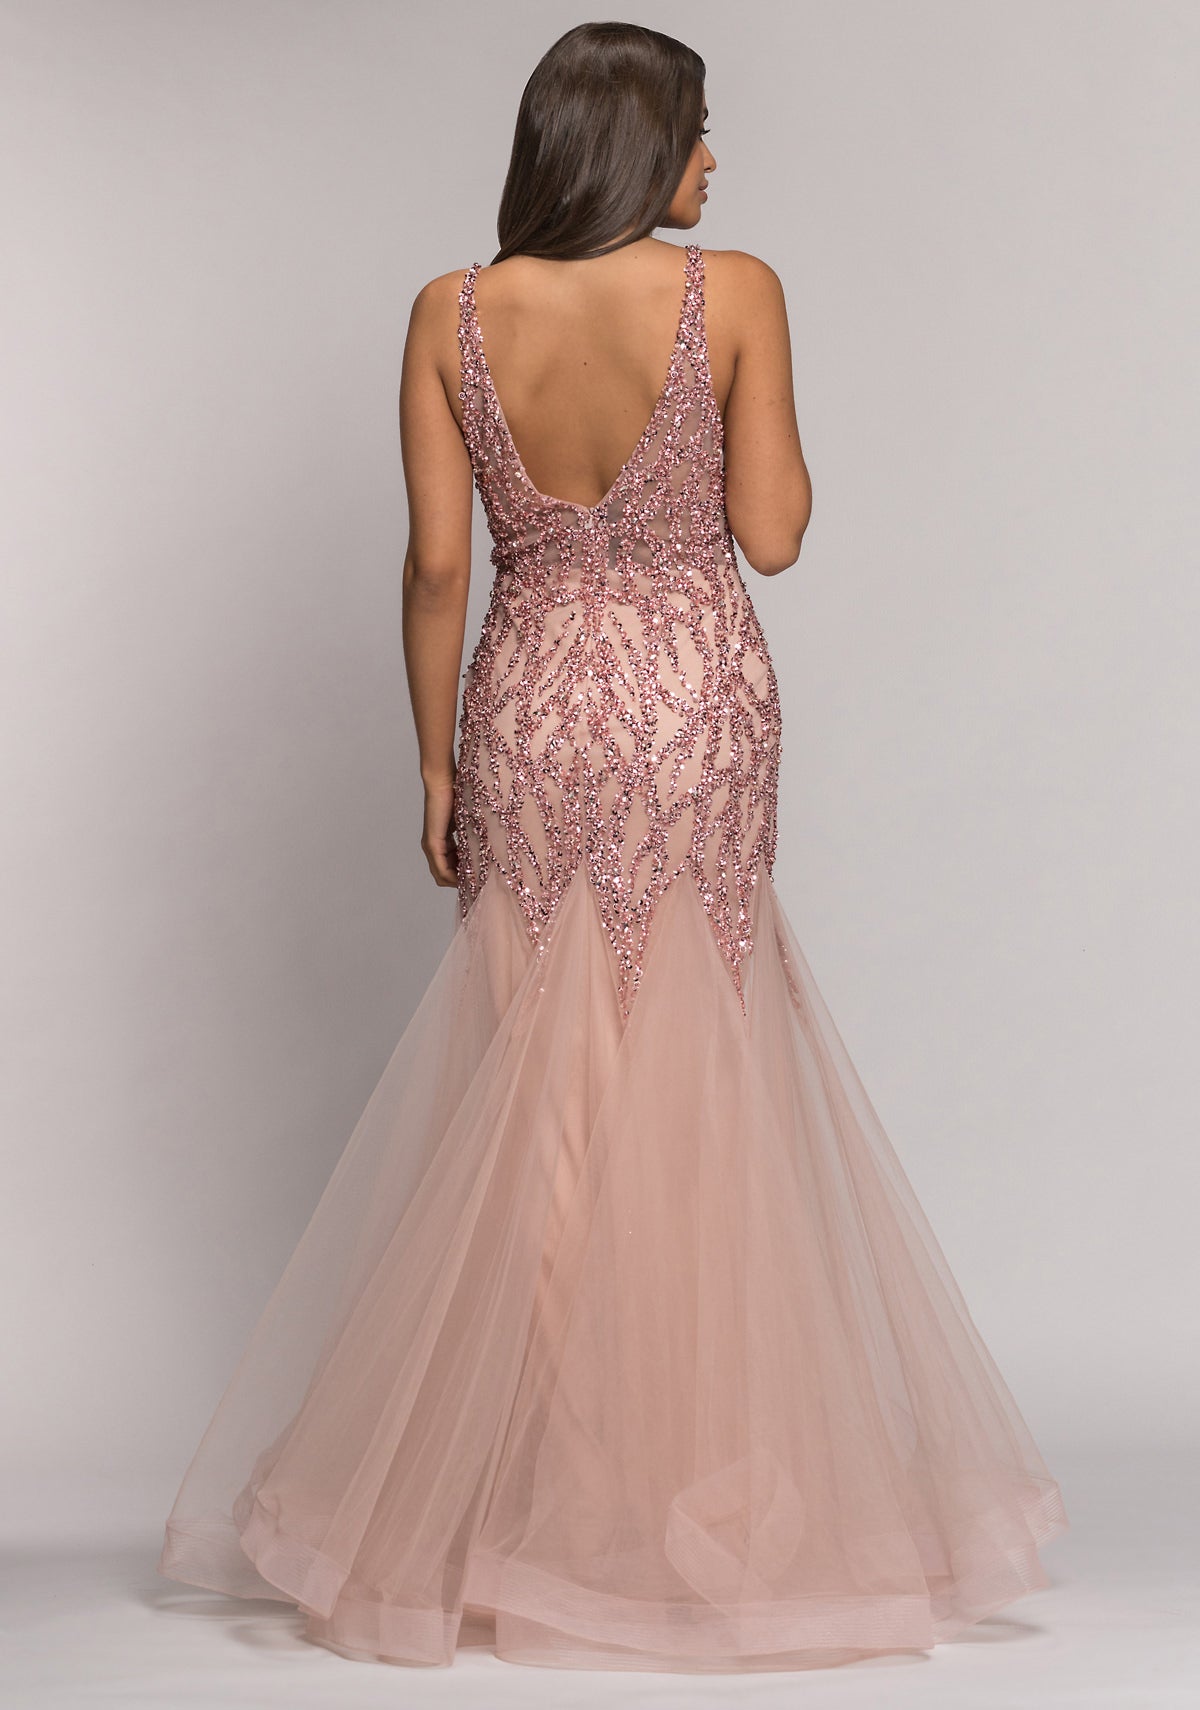 Pink sparkly prom dress